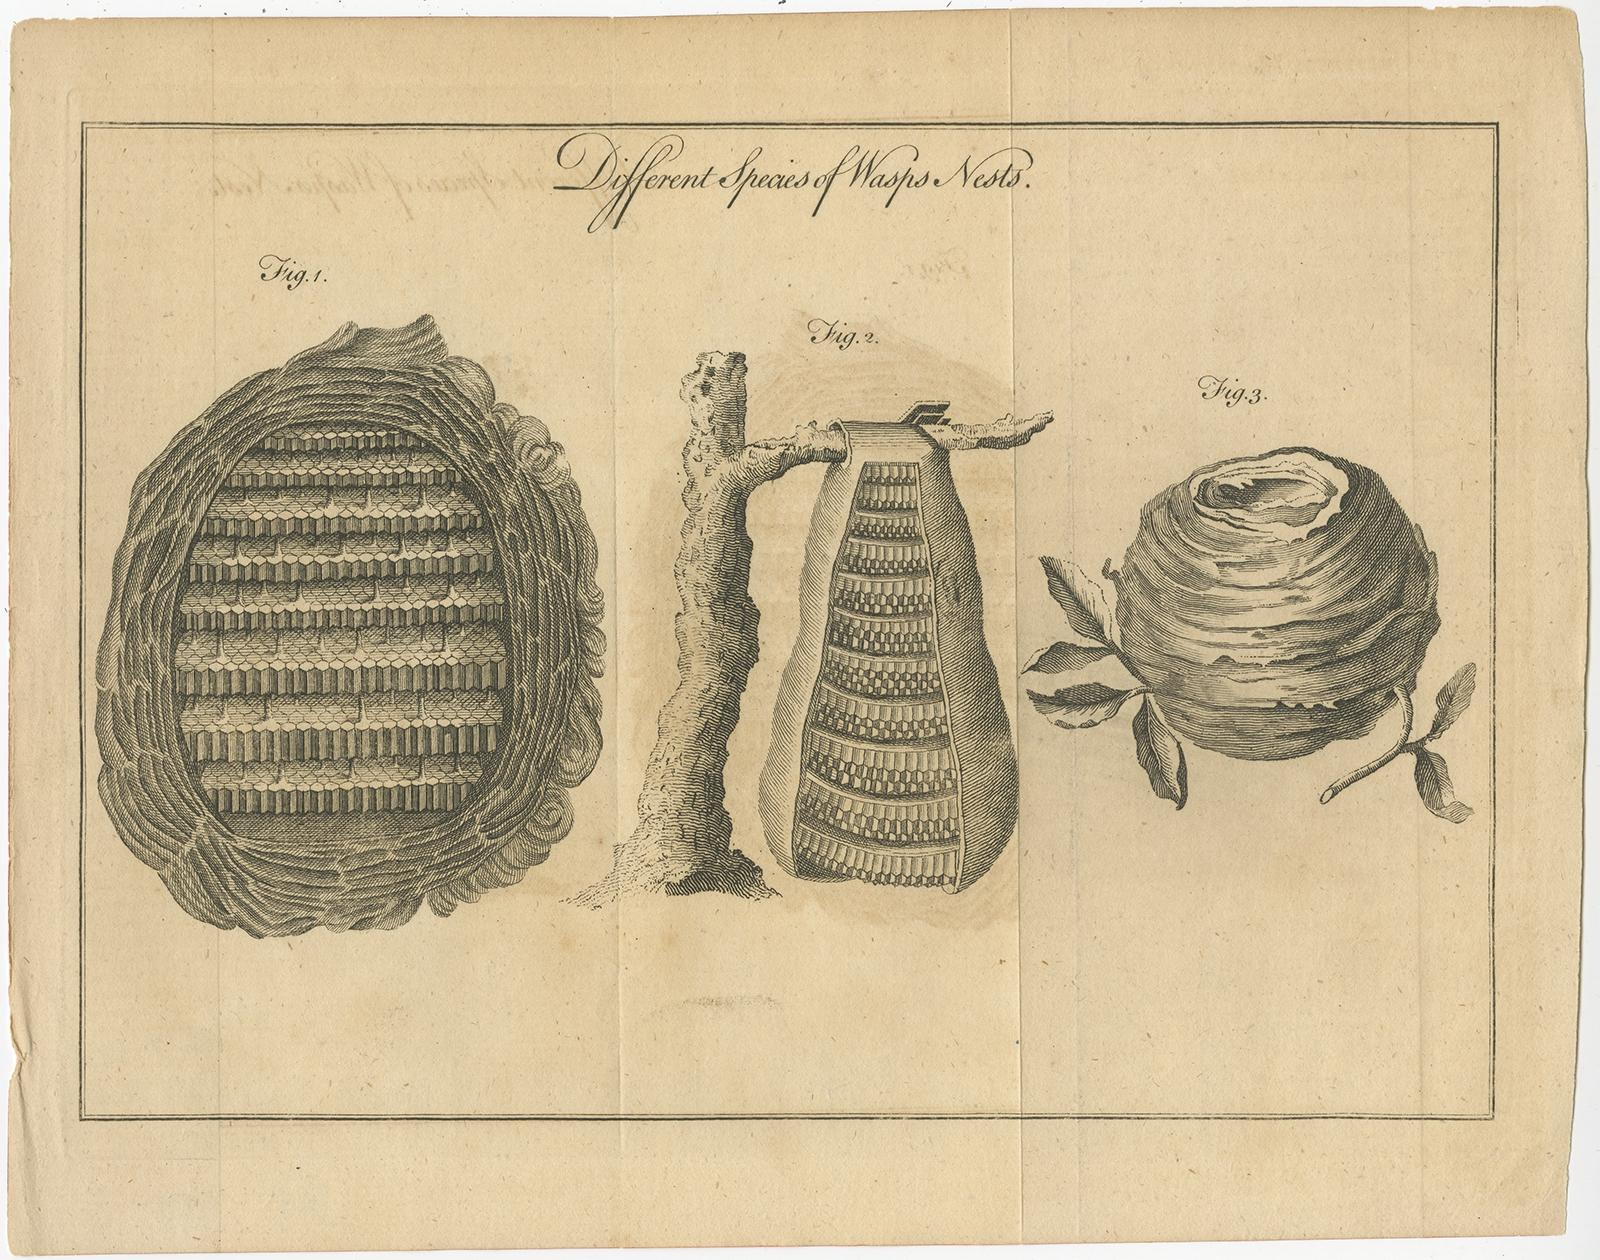 Antique print titled 'Different Species of Wasps Nests'. Copper engraving of various wasp nests. Source unknown, to be determined. 

Artists and engravers: Anonymous.